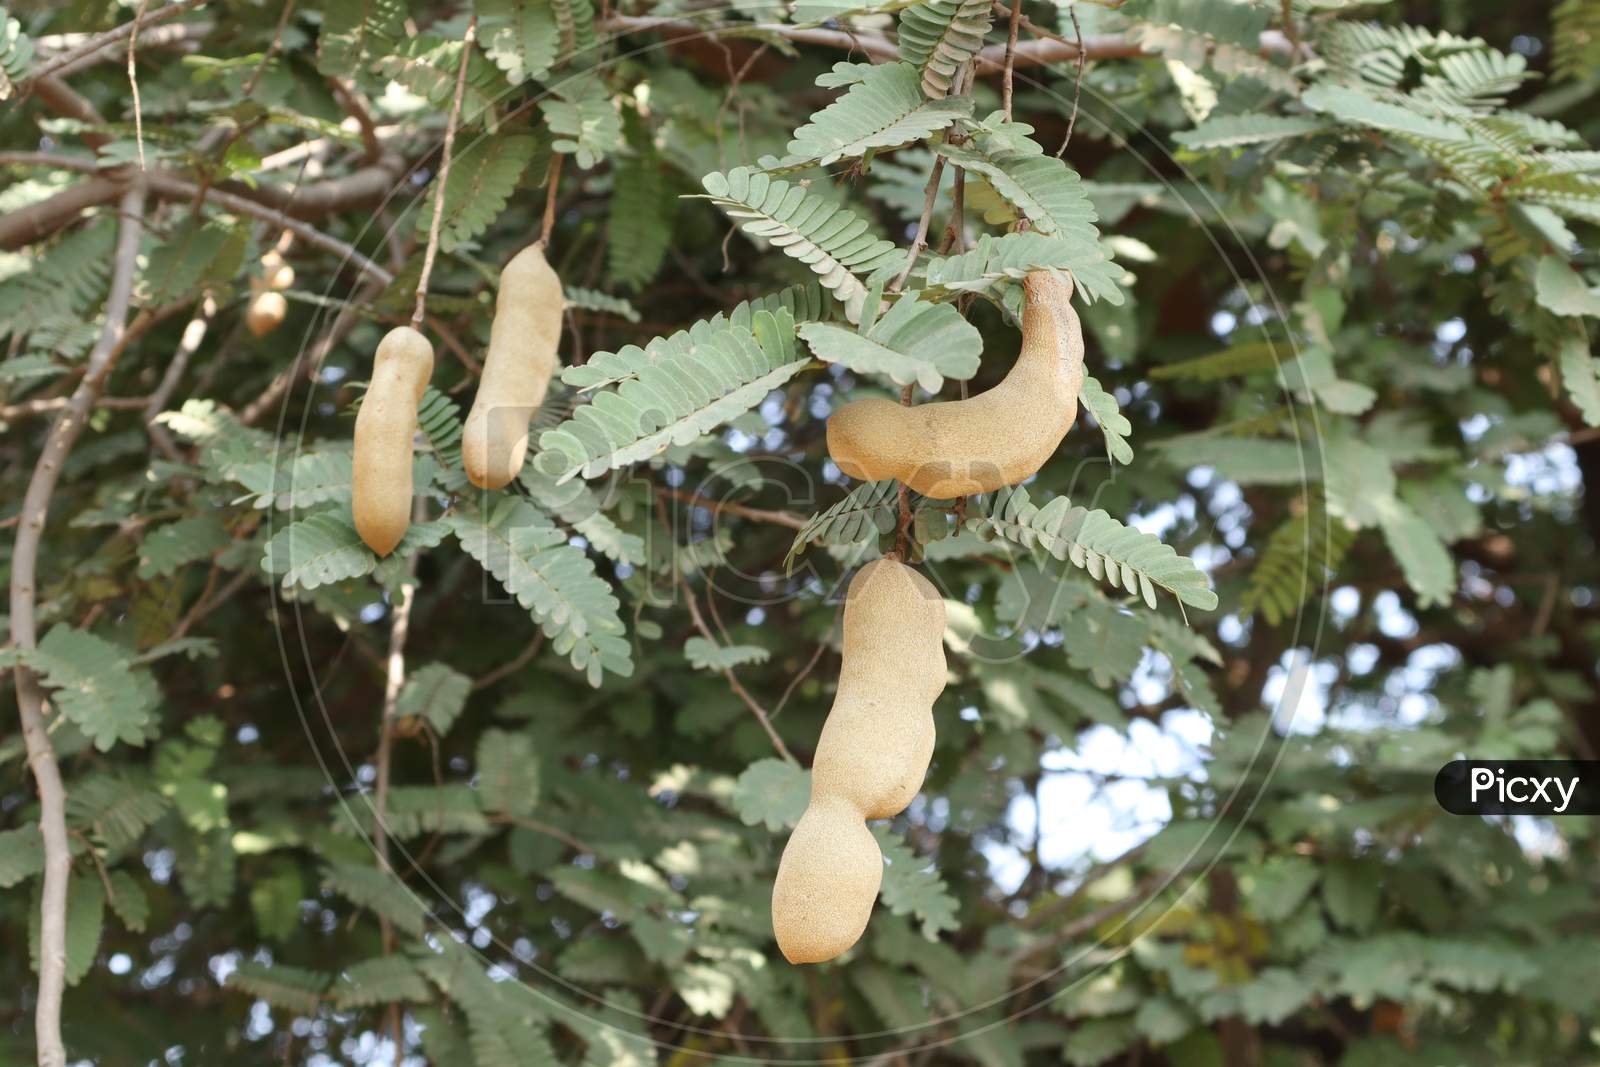 This is a tamarind tree